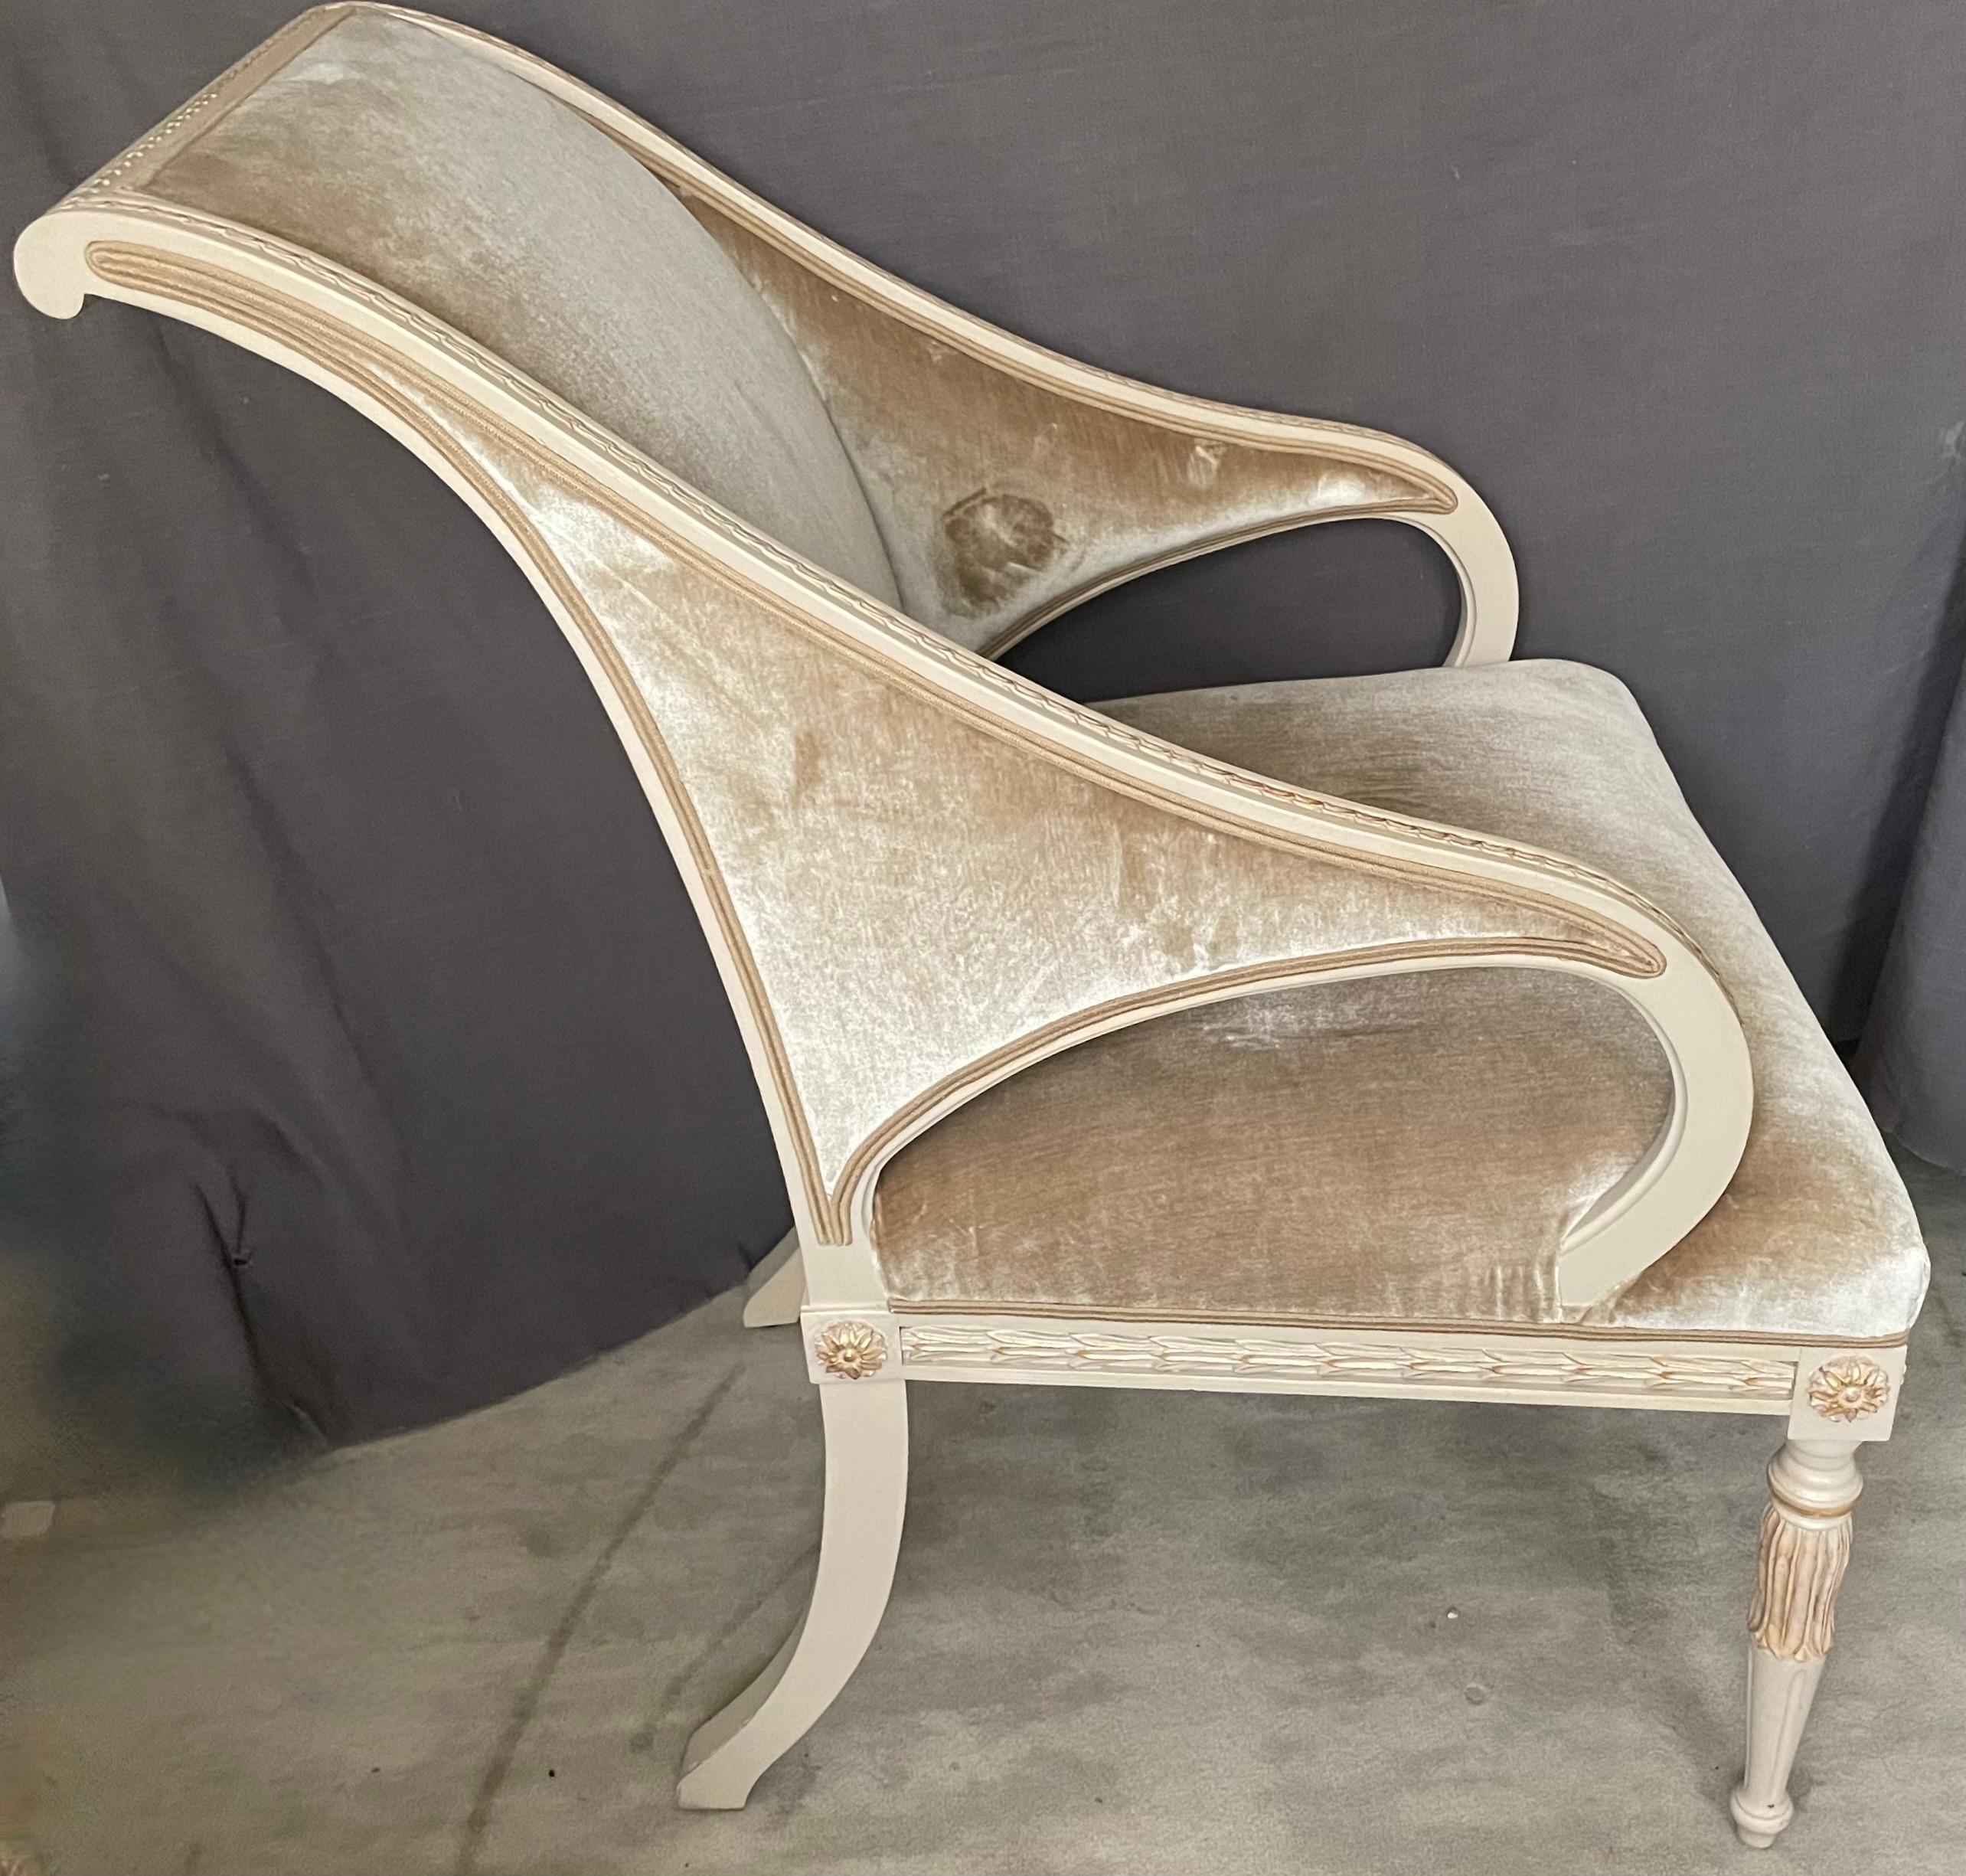 Pair of Swedish armchairs.  Vintage pair of Gustavian style painted open-arm chairs with neoclassical details; recovered in camel silk velvet with matching silk cotton piping; carved wood foliate banding and paterae  enhanced in soft gold paint. 